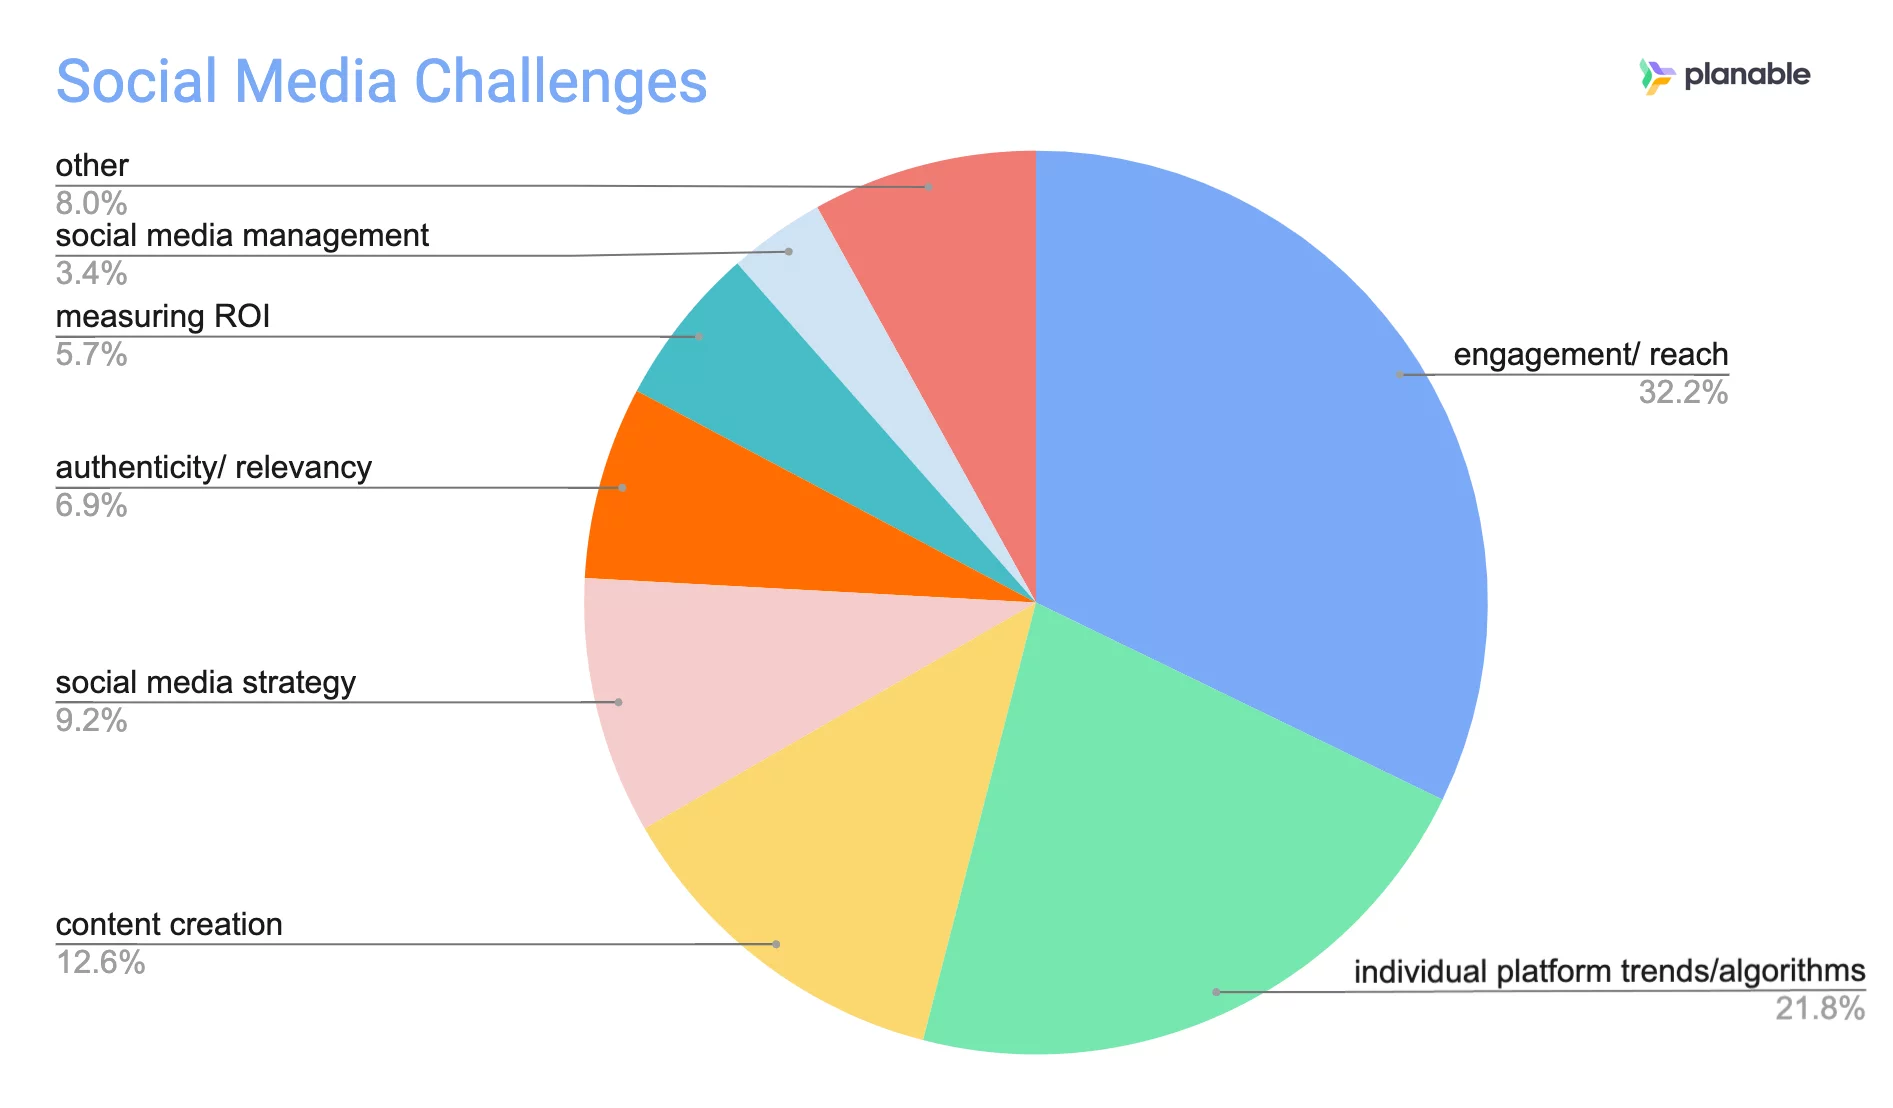 The Biggest Social Media Challenges according to 80+ SMMs Planable